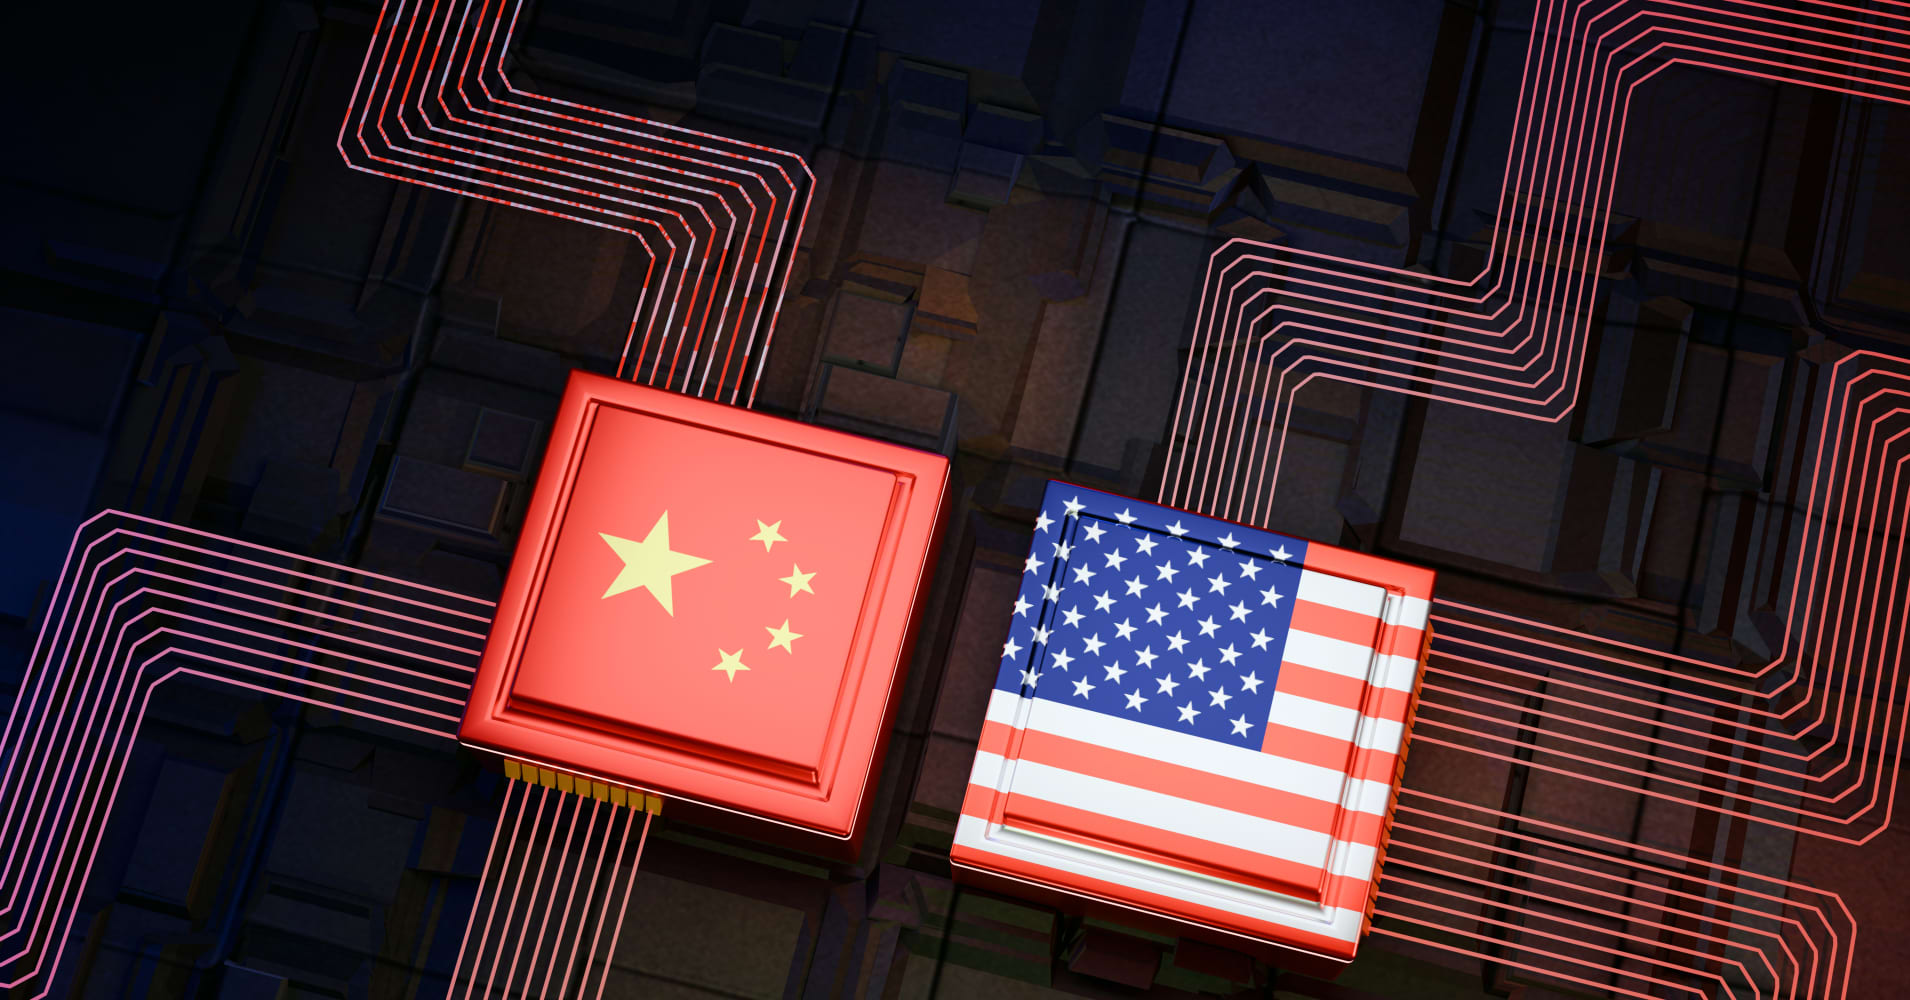 china remains crucial for u.s. chipmakers amid rising tensions between the world's top two economies